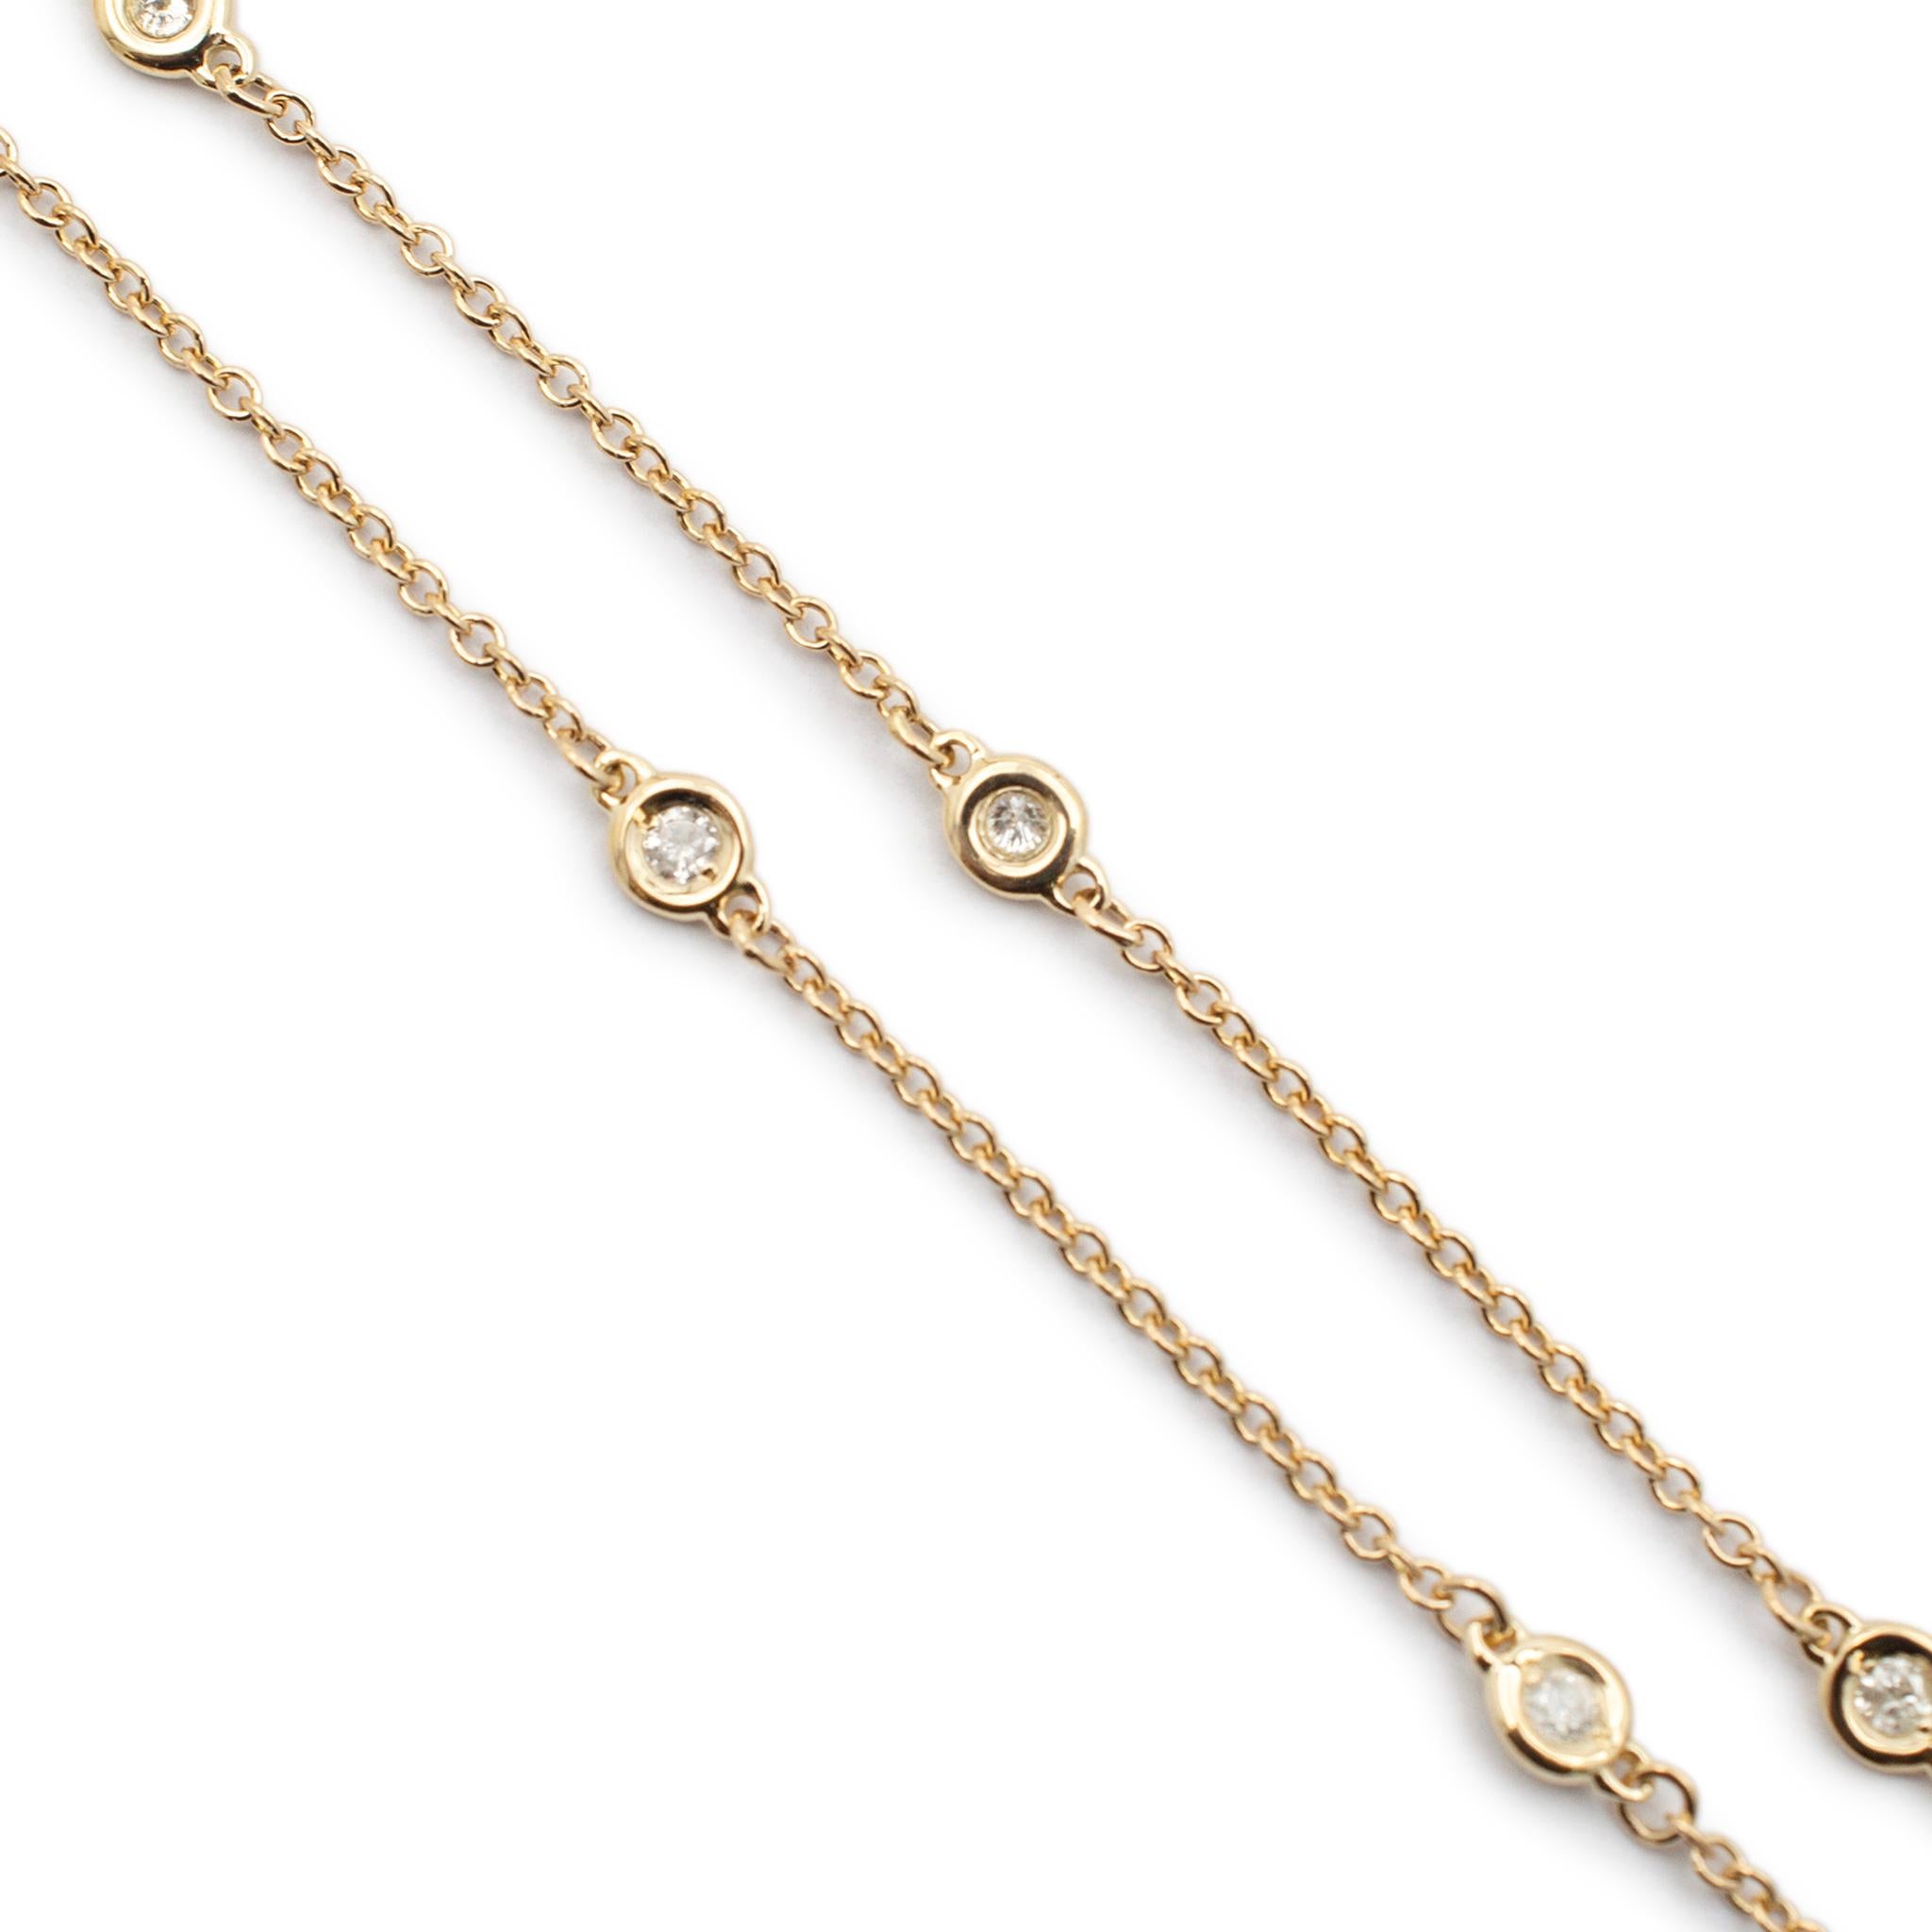 Gender: Ladies

Metal Type: 14K Yellow Gold

Length: 18.00 inches

Width: 1.25 mm

Weight: 2.30 grams

Ladies 14K yellow gold single strand diamond necklace. T Engraved with 